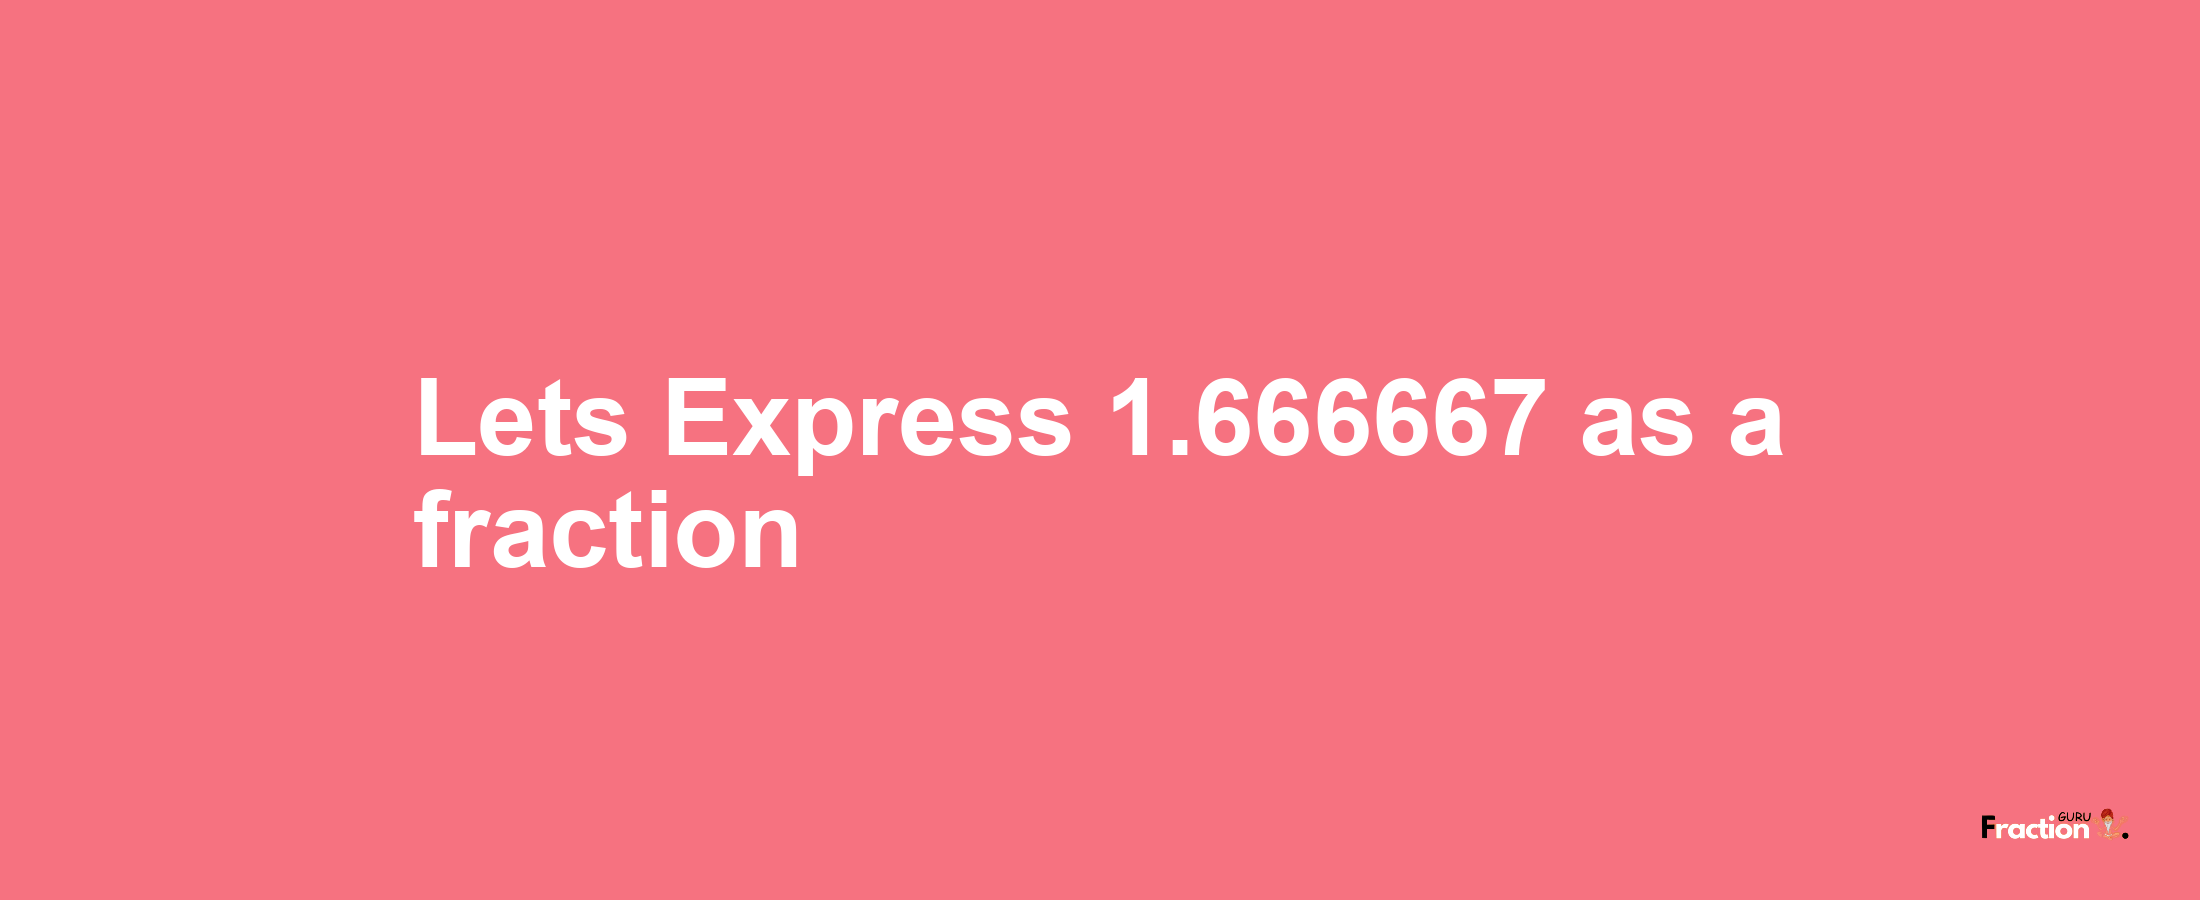 Lets Express 1.666667 as afraction